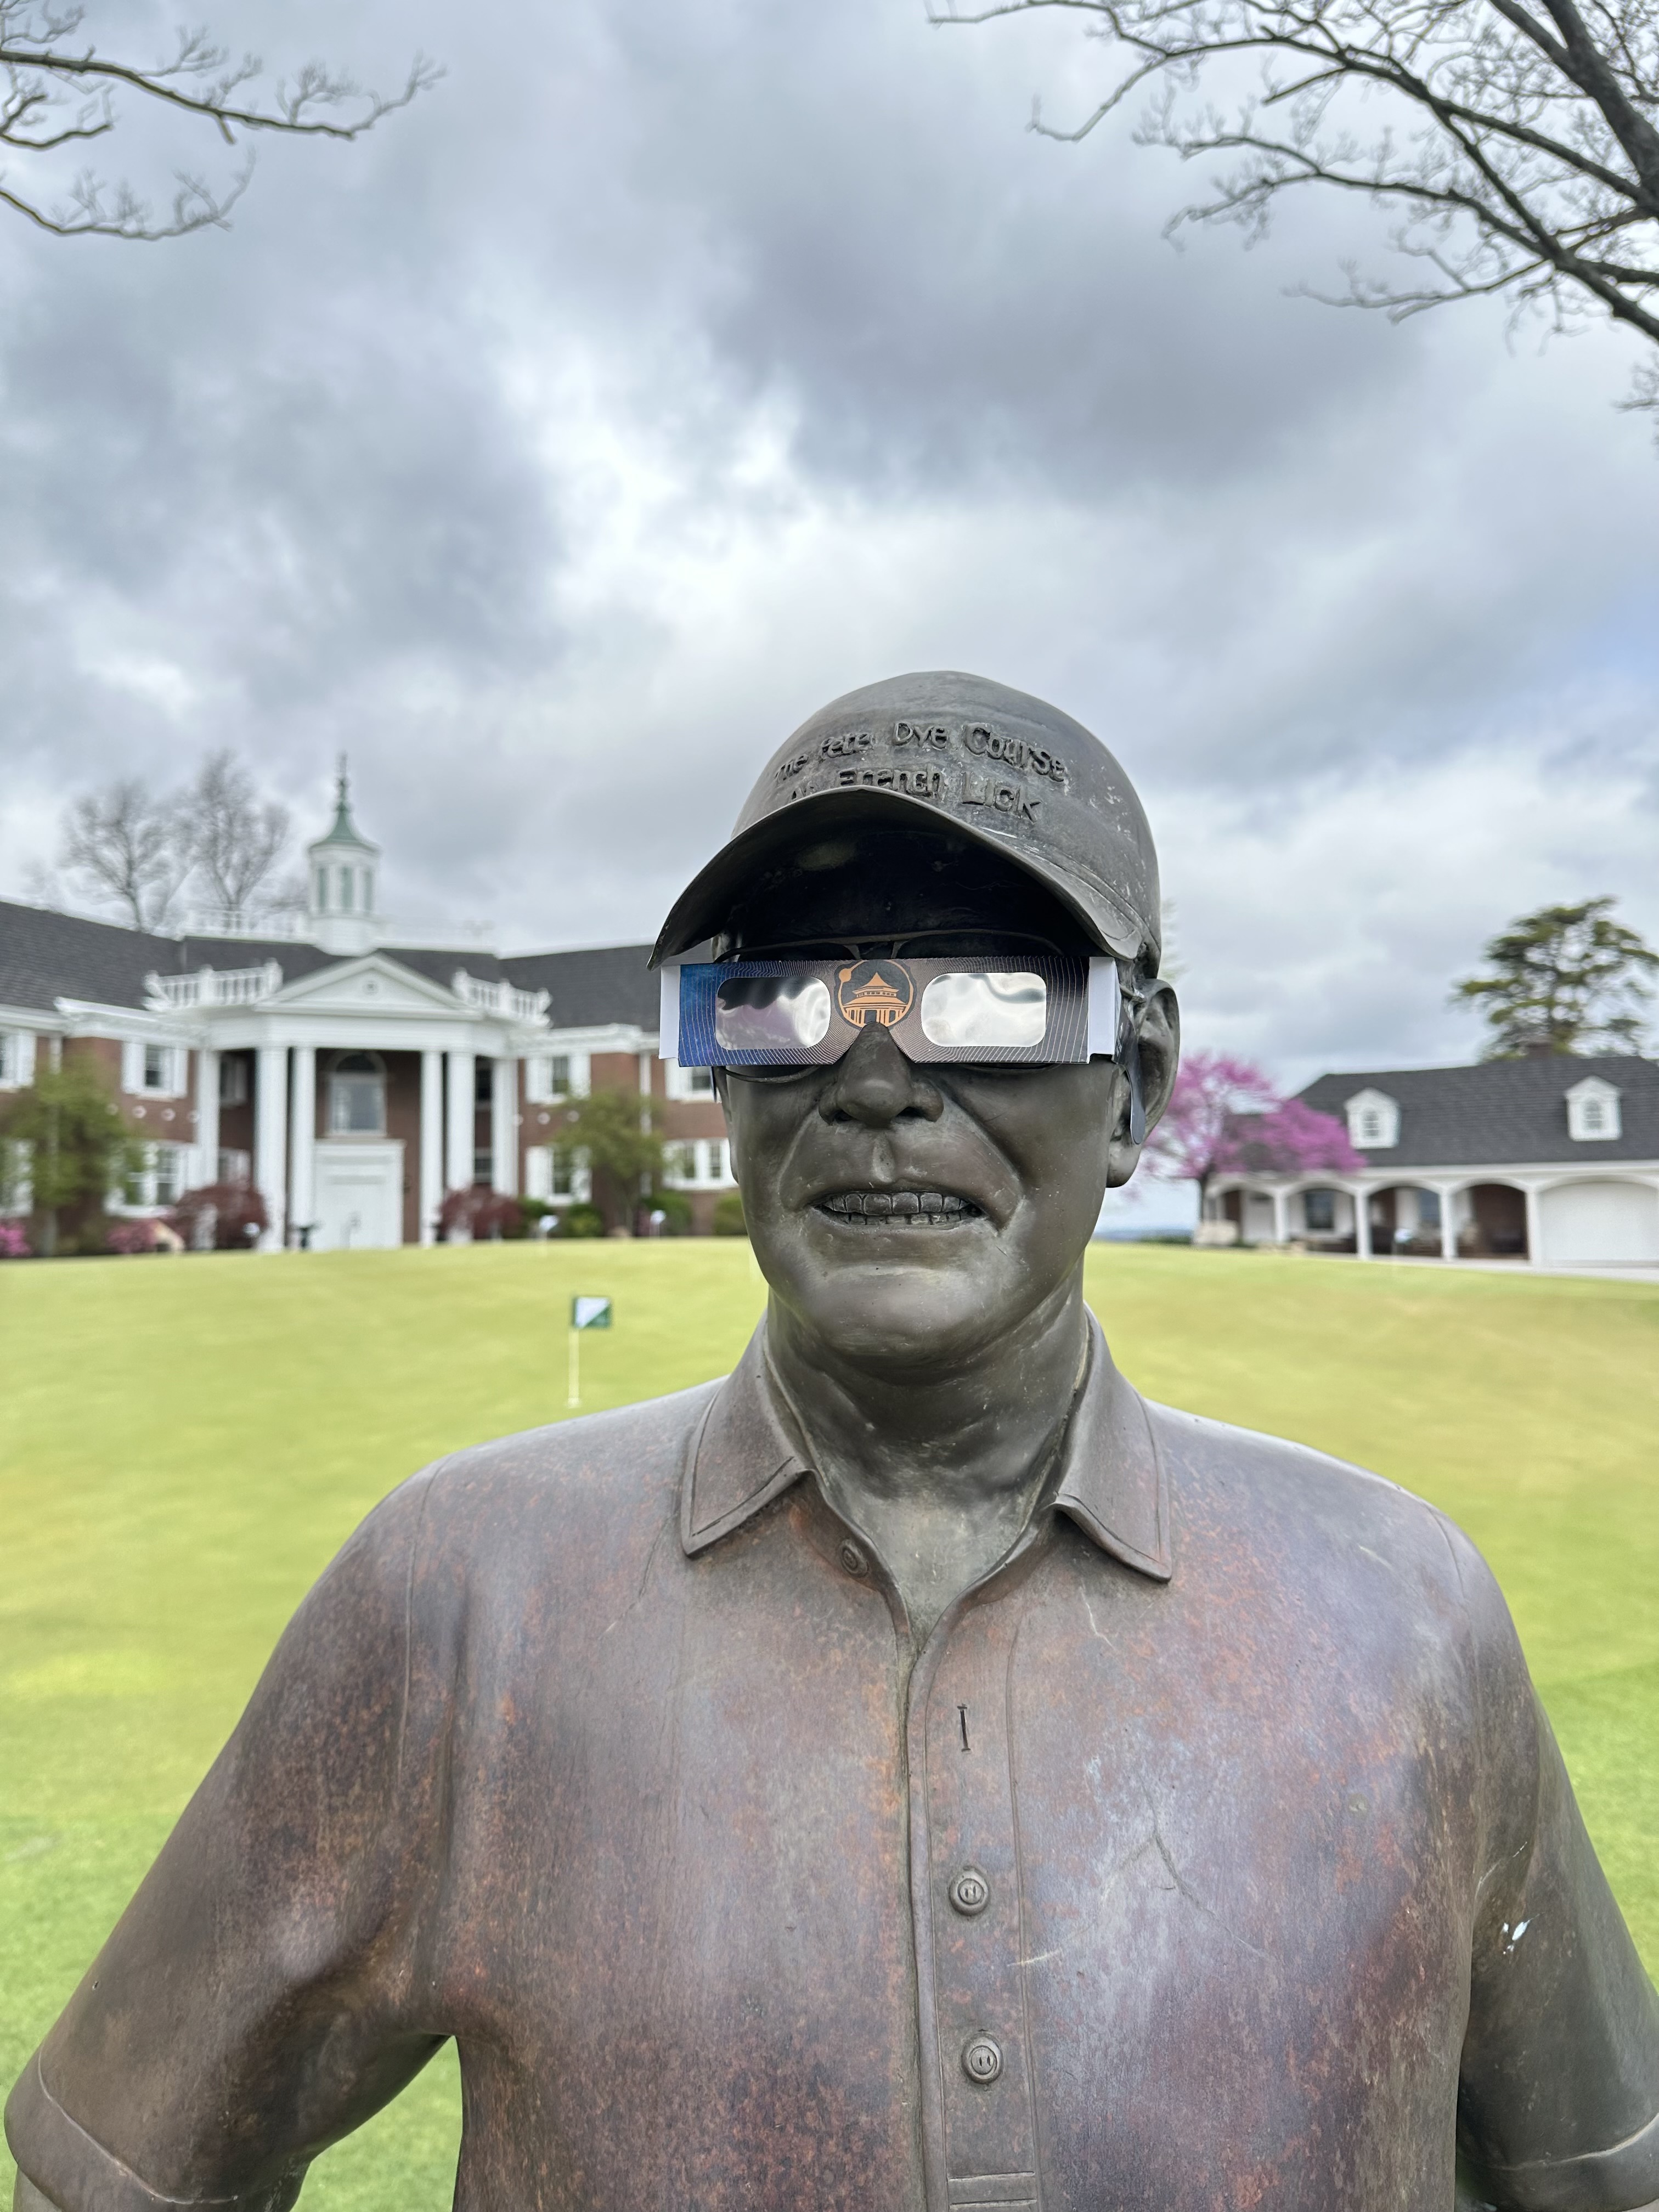 a statue of a man wearing sunglasses